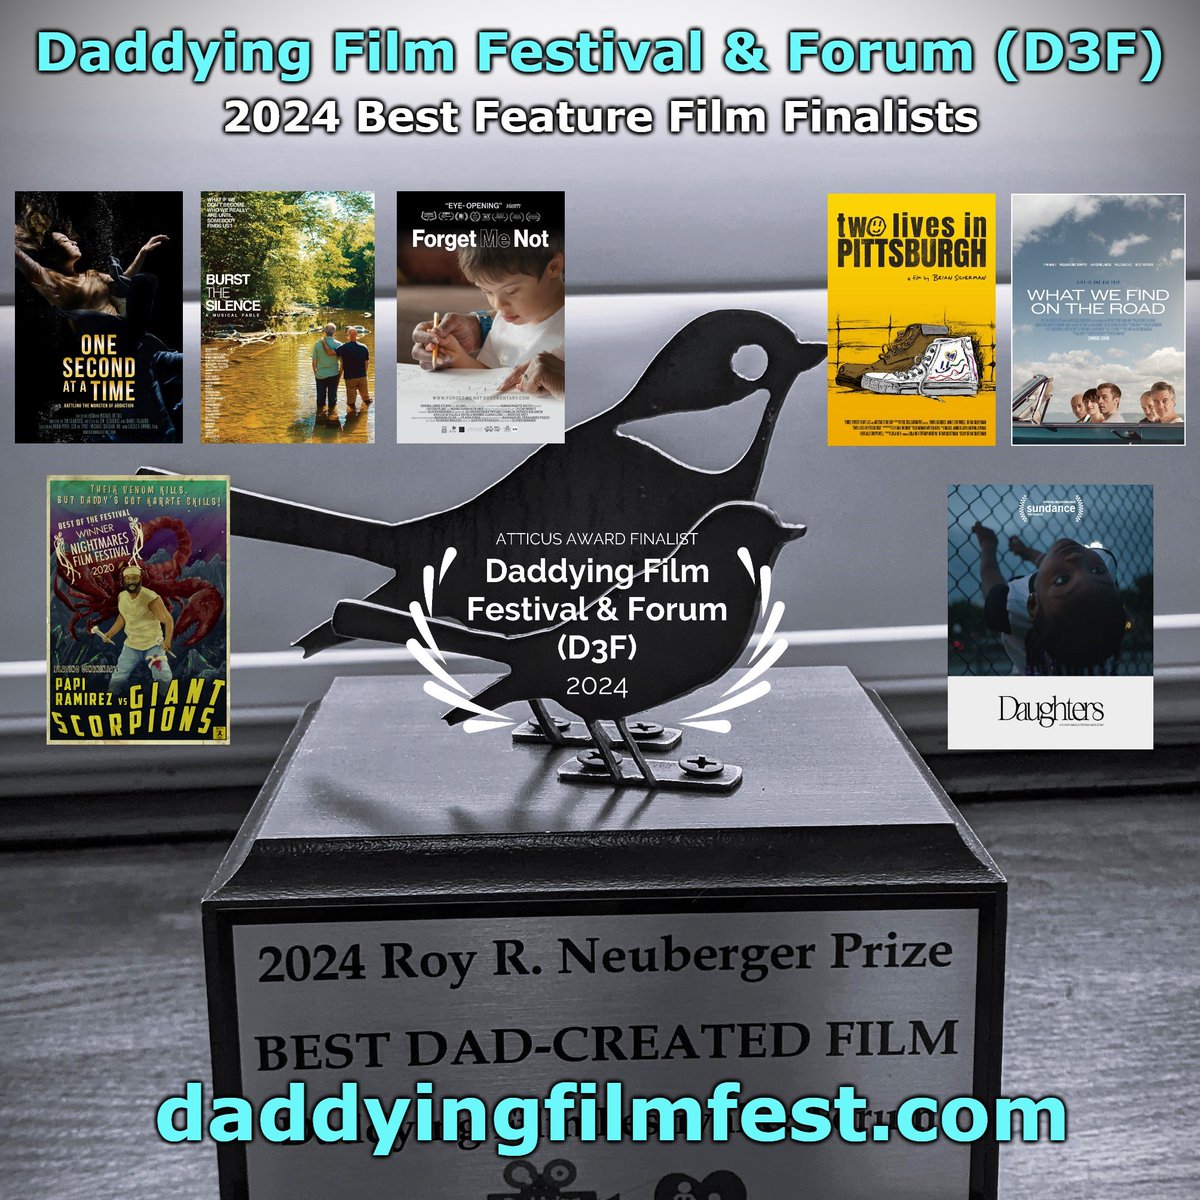 D3F 2024 BEST FEATURE FILM FINALISTS: Virtual #Daddying #FilmFestival is live & FREE on Eventive thru 5/9 & we've announced Finalists! FREE passes to see/vote for them: daddyingfilmfest.com/get-free-passes @girlsforachange @twolivesinpitt @ArtEddy3 @ParentCamp @homedadnet @GPFO @FreeLibrary